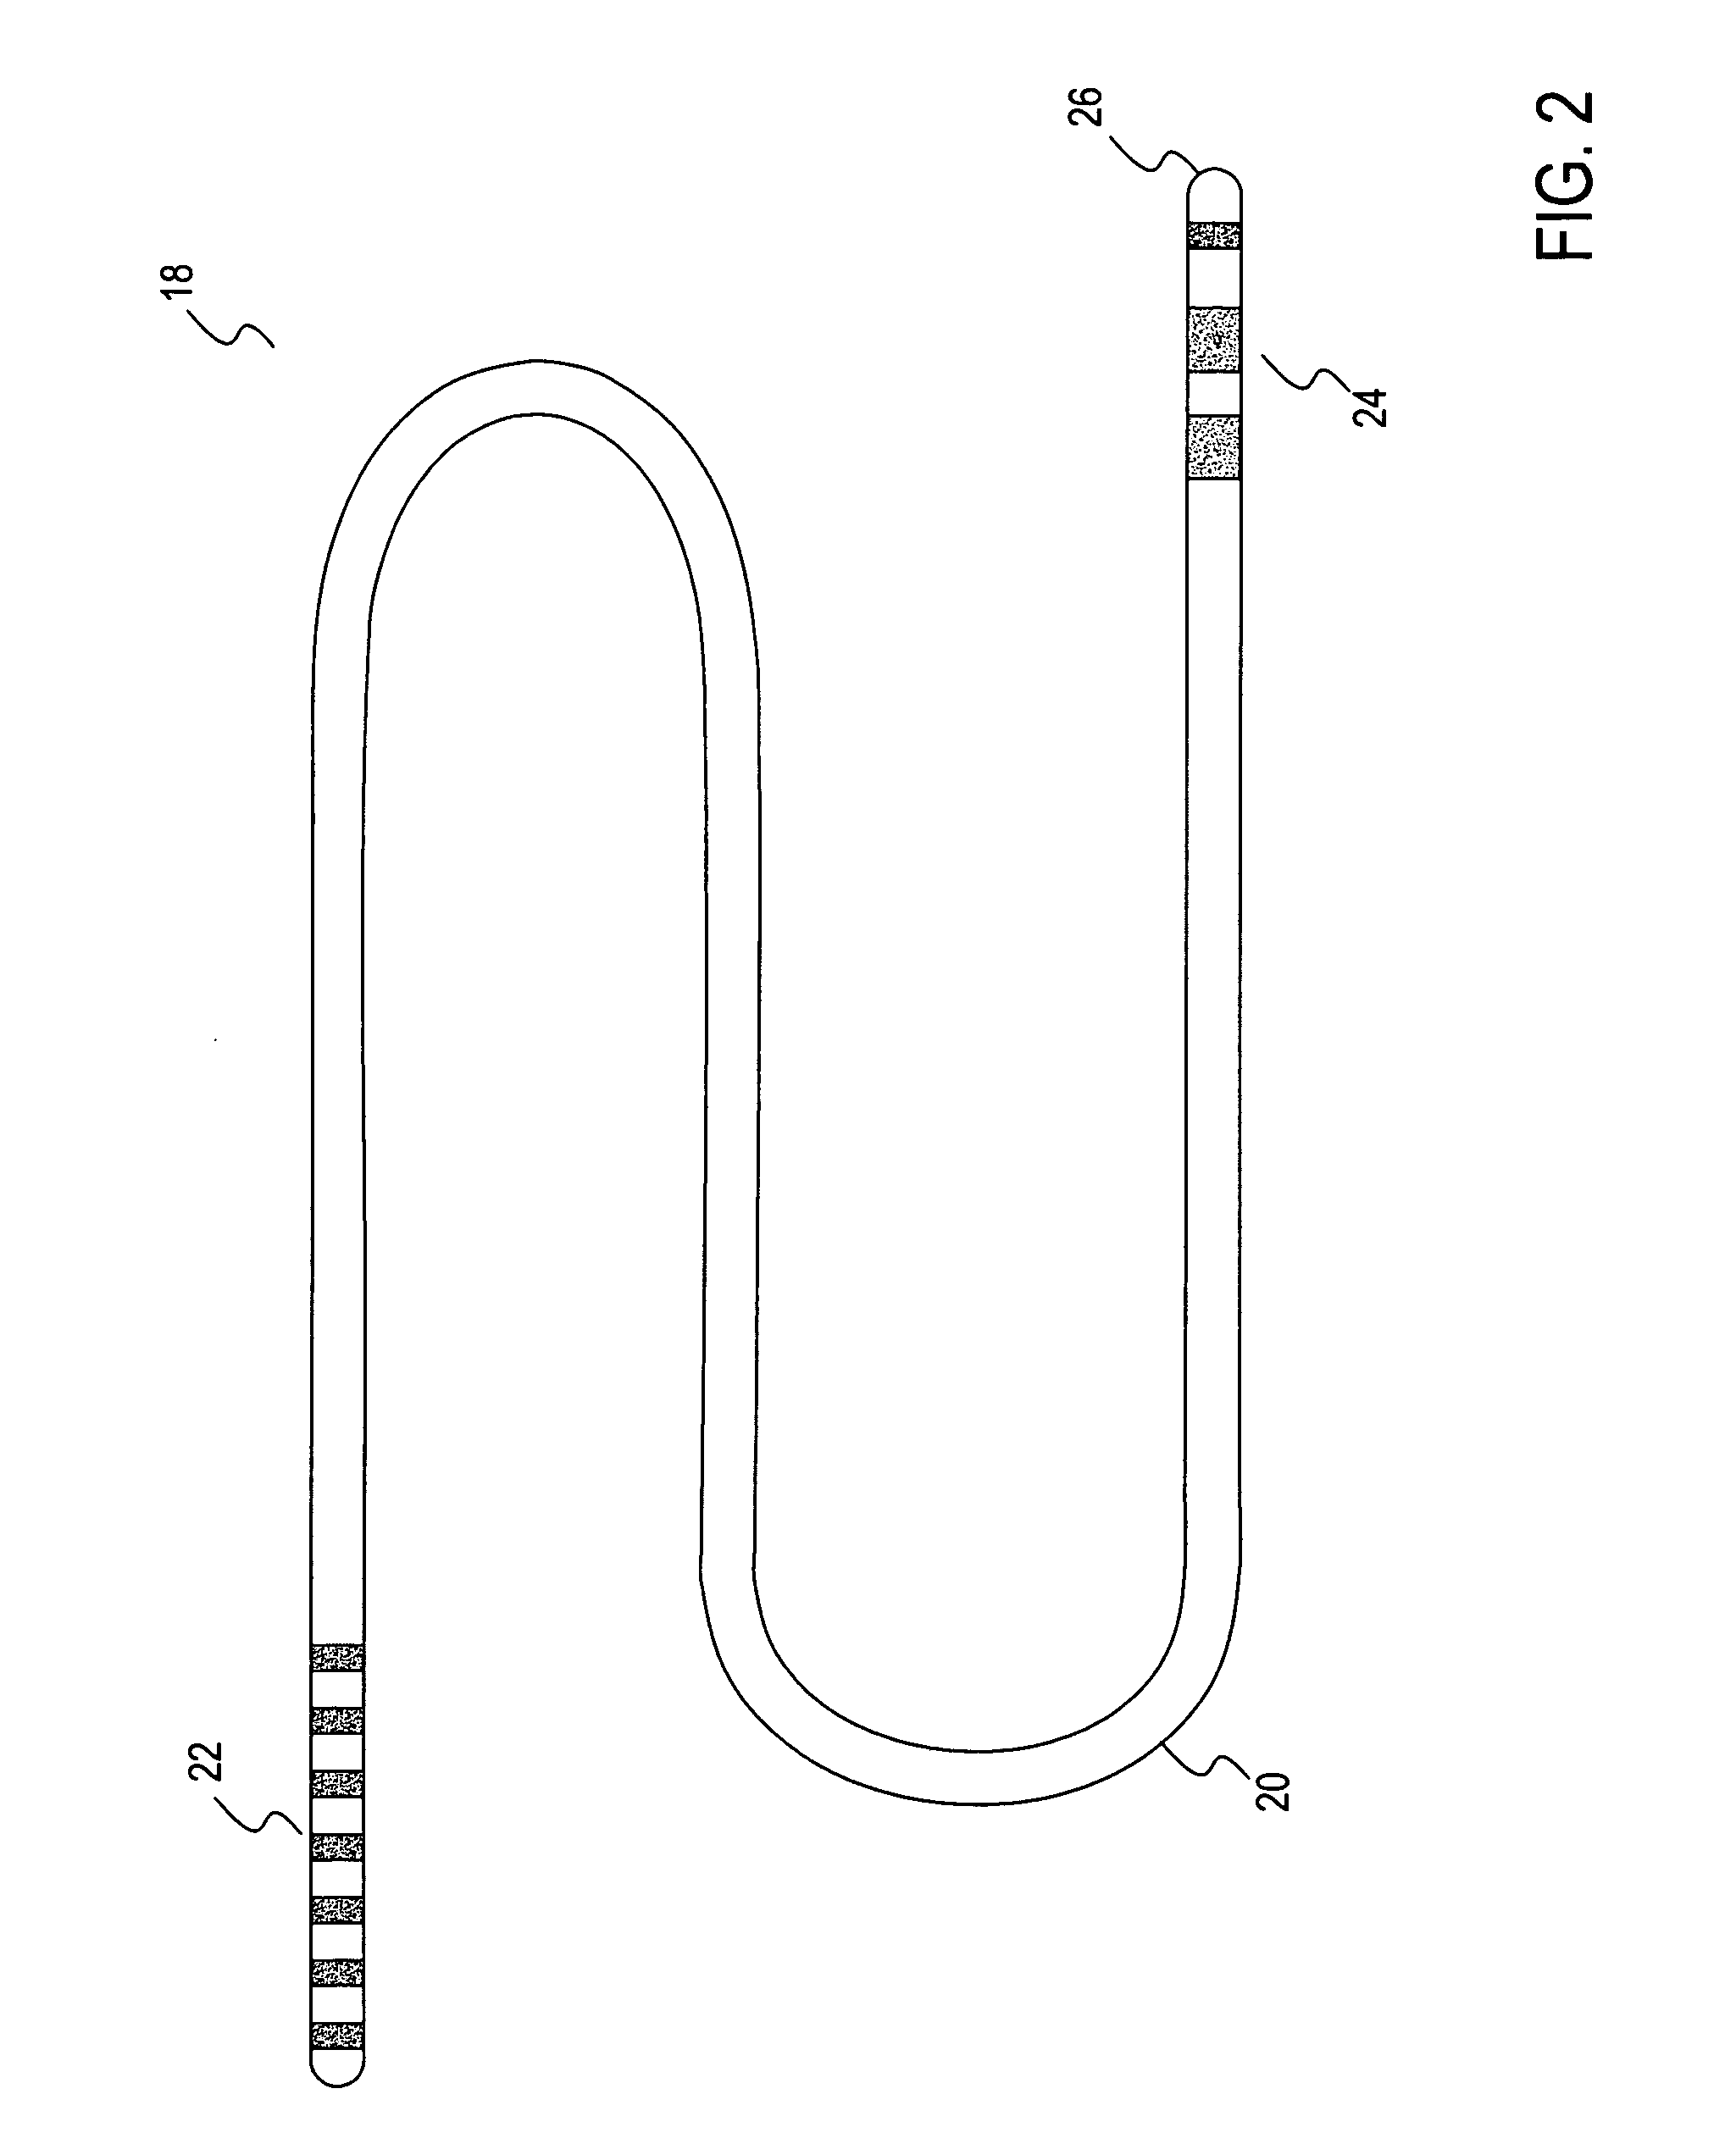 Apparatus for ascertaining blood characteristics and probe for use therewith